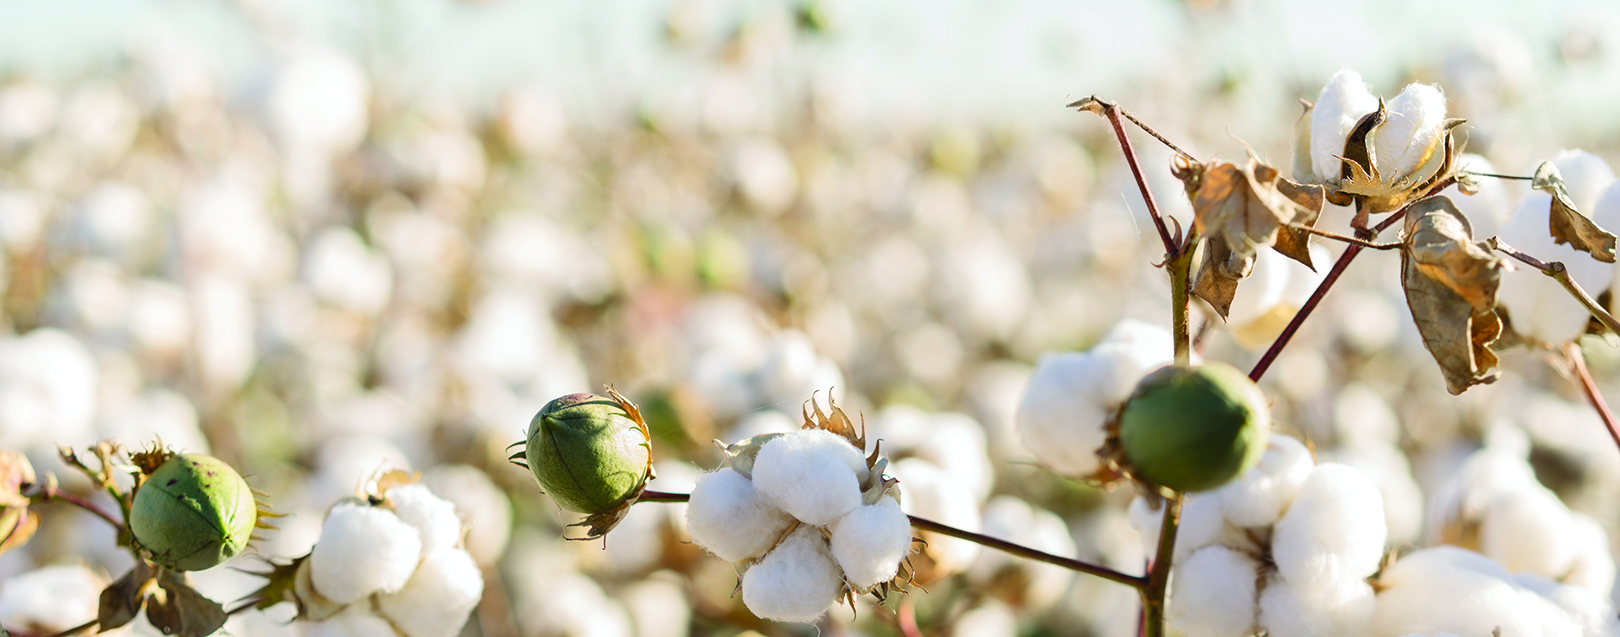 Cotton on to this exports idea March 2018 issue